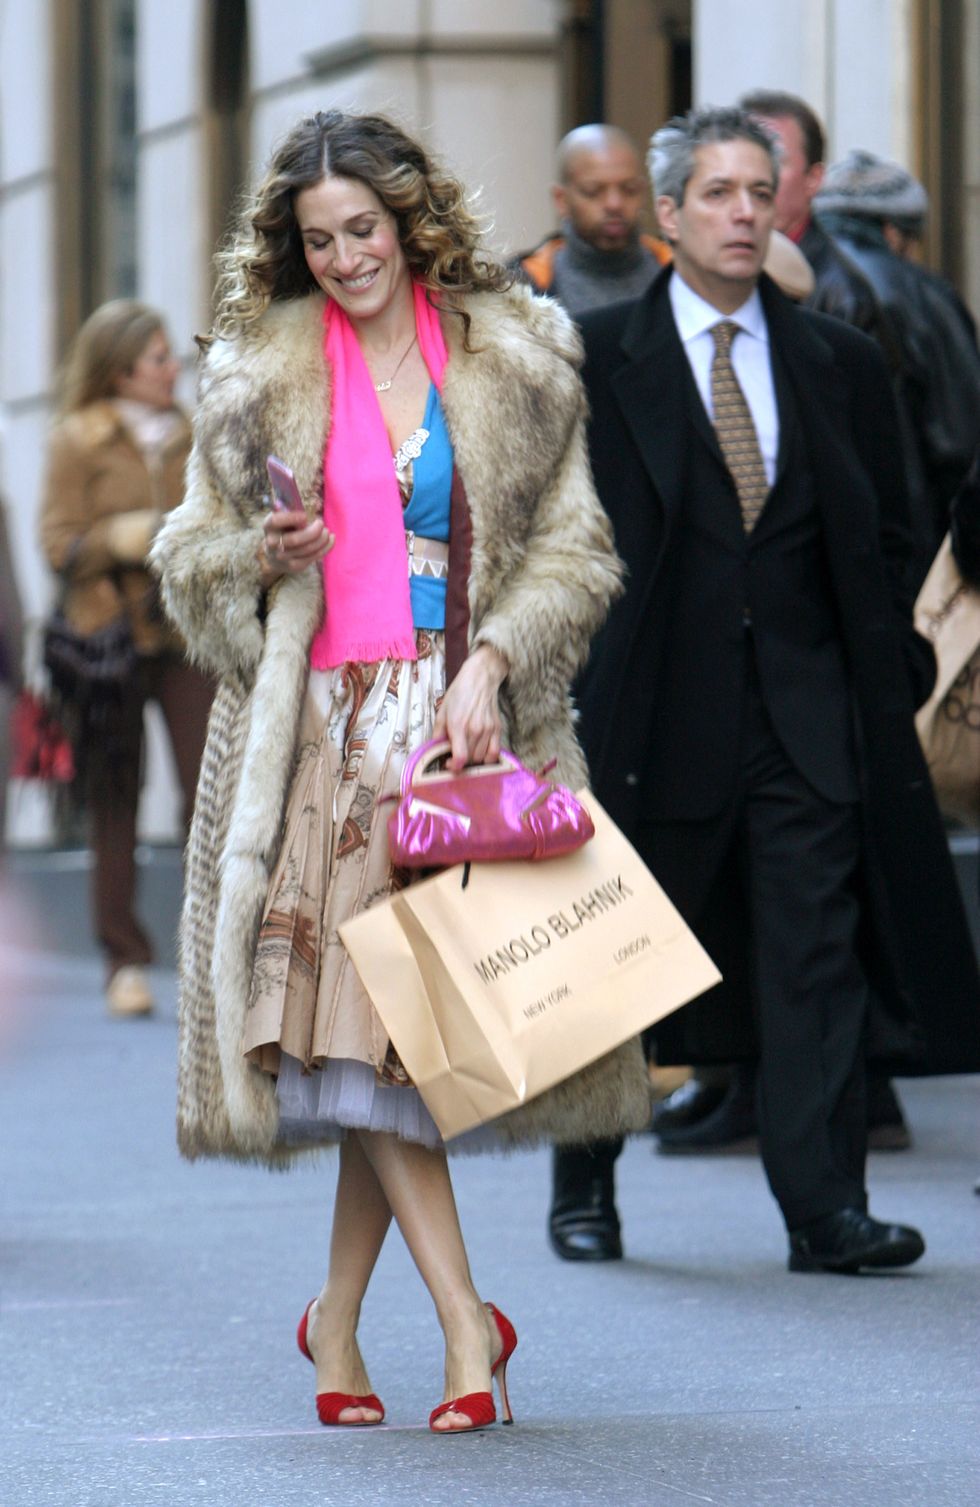 Shop Carrie Bradshaw's bags and 'baguettes' from Sex and the City